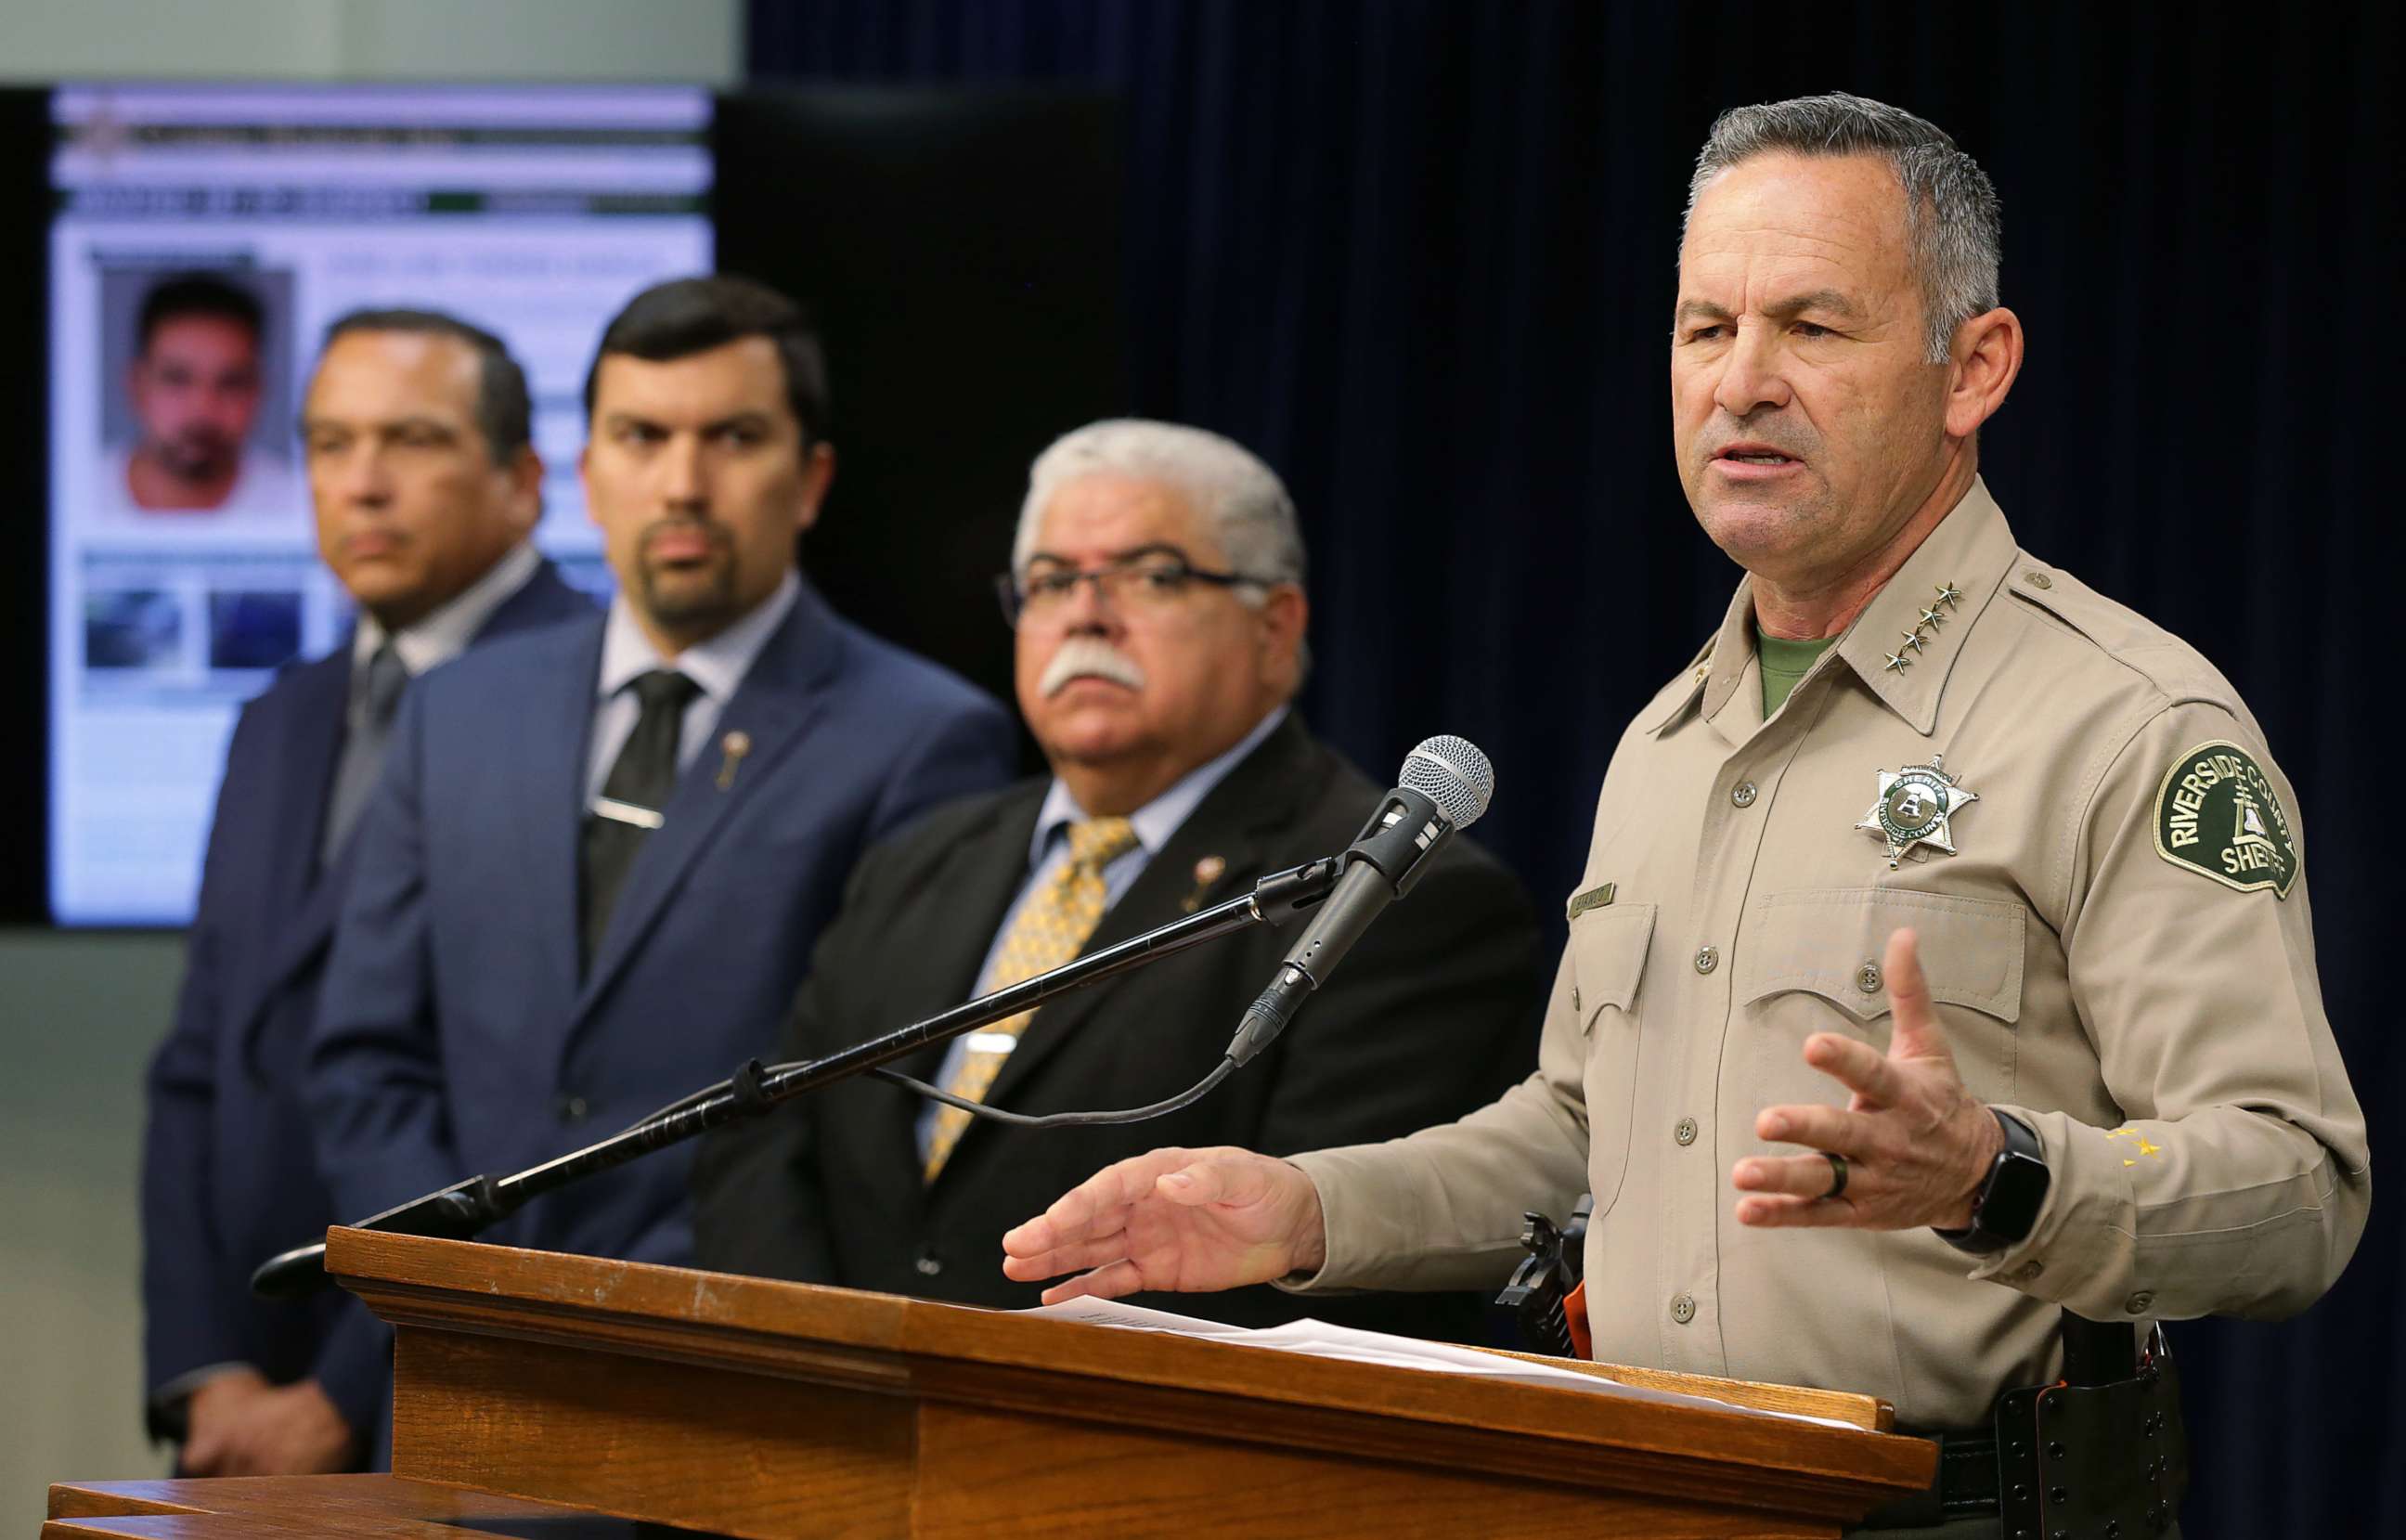 PHOTO: Riverside County Sheriff Chad Bianco names Jose Luis Torres Garcia as the suspect in the triple homicide at Perris Valley Cemetery during a press conference at Riverside County Sheriff's Department in Riverside, Calif., on Feb 20, 2020.